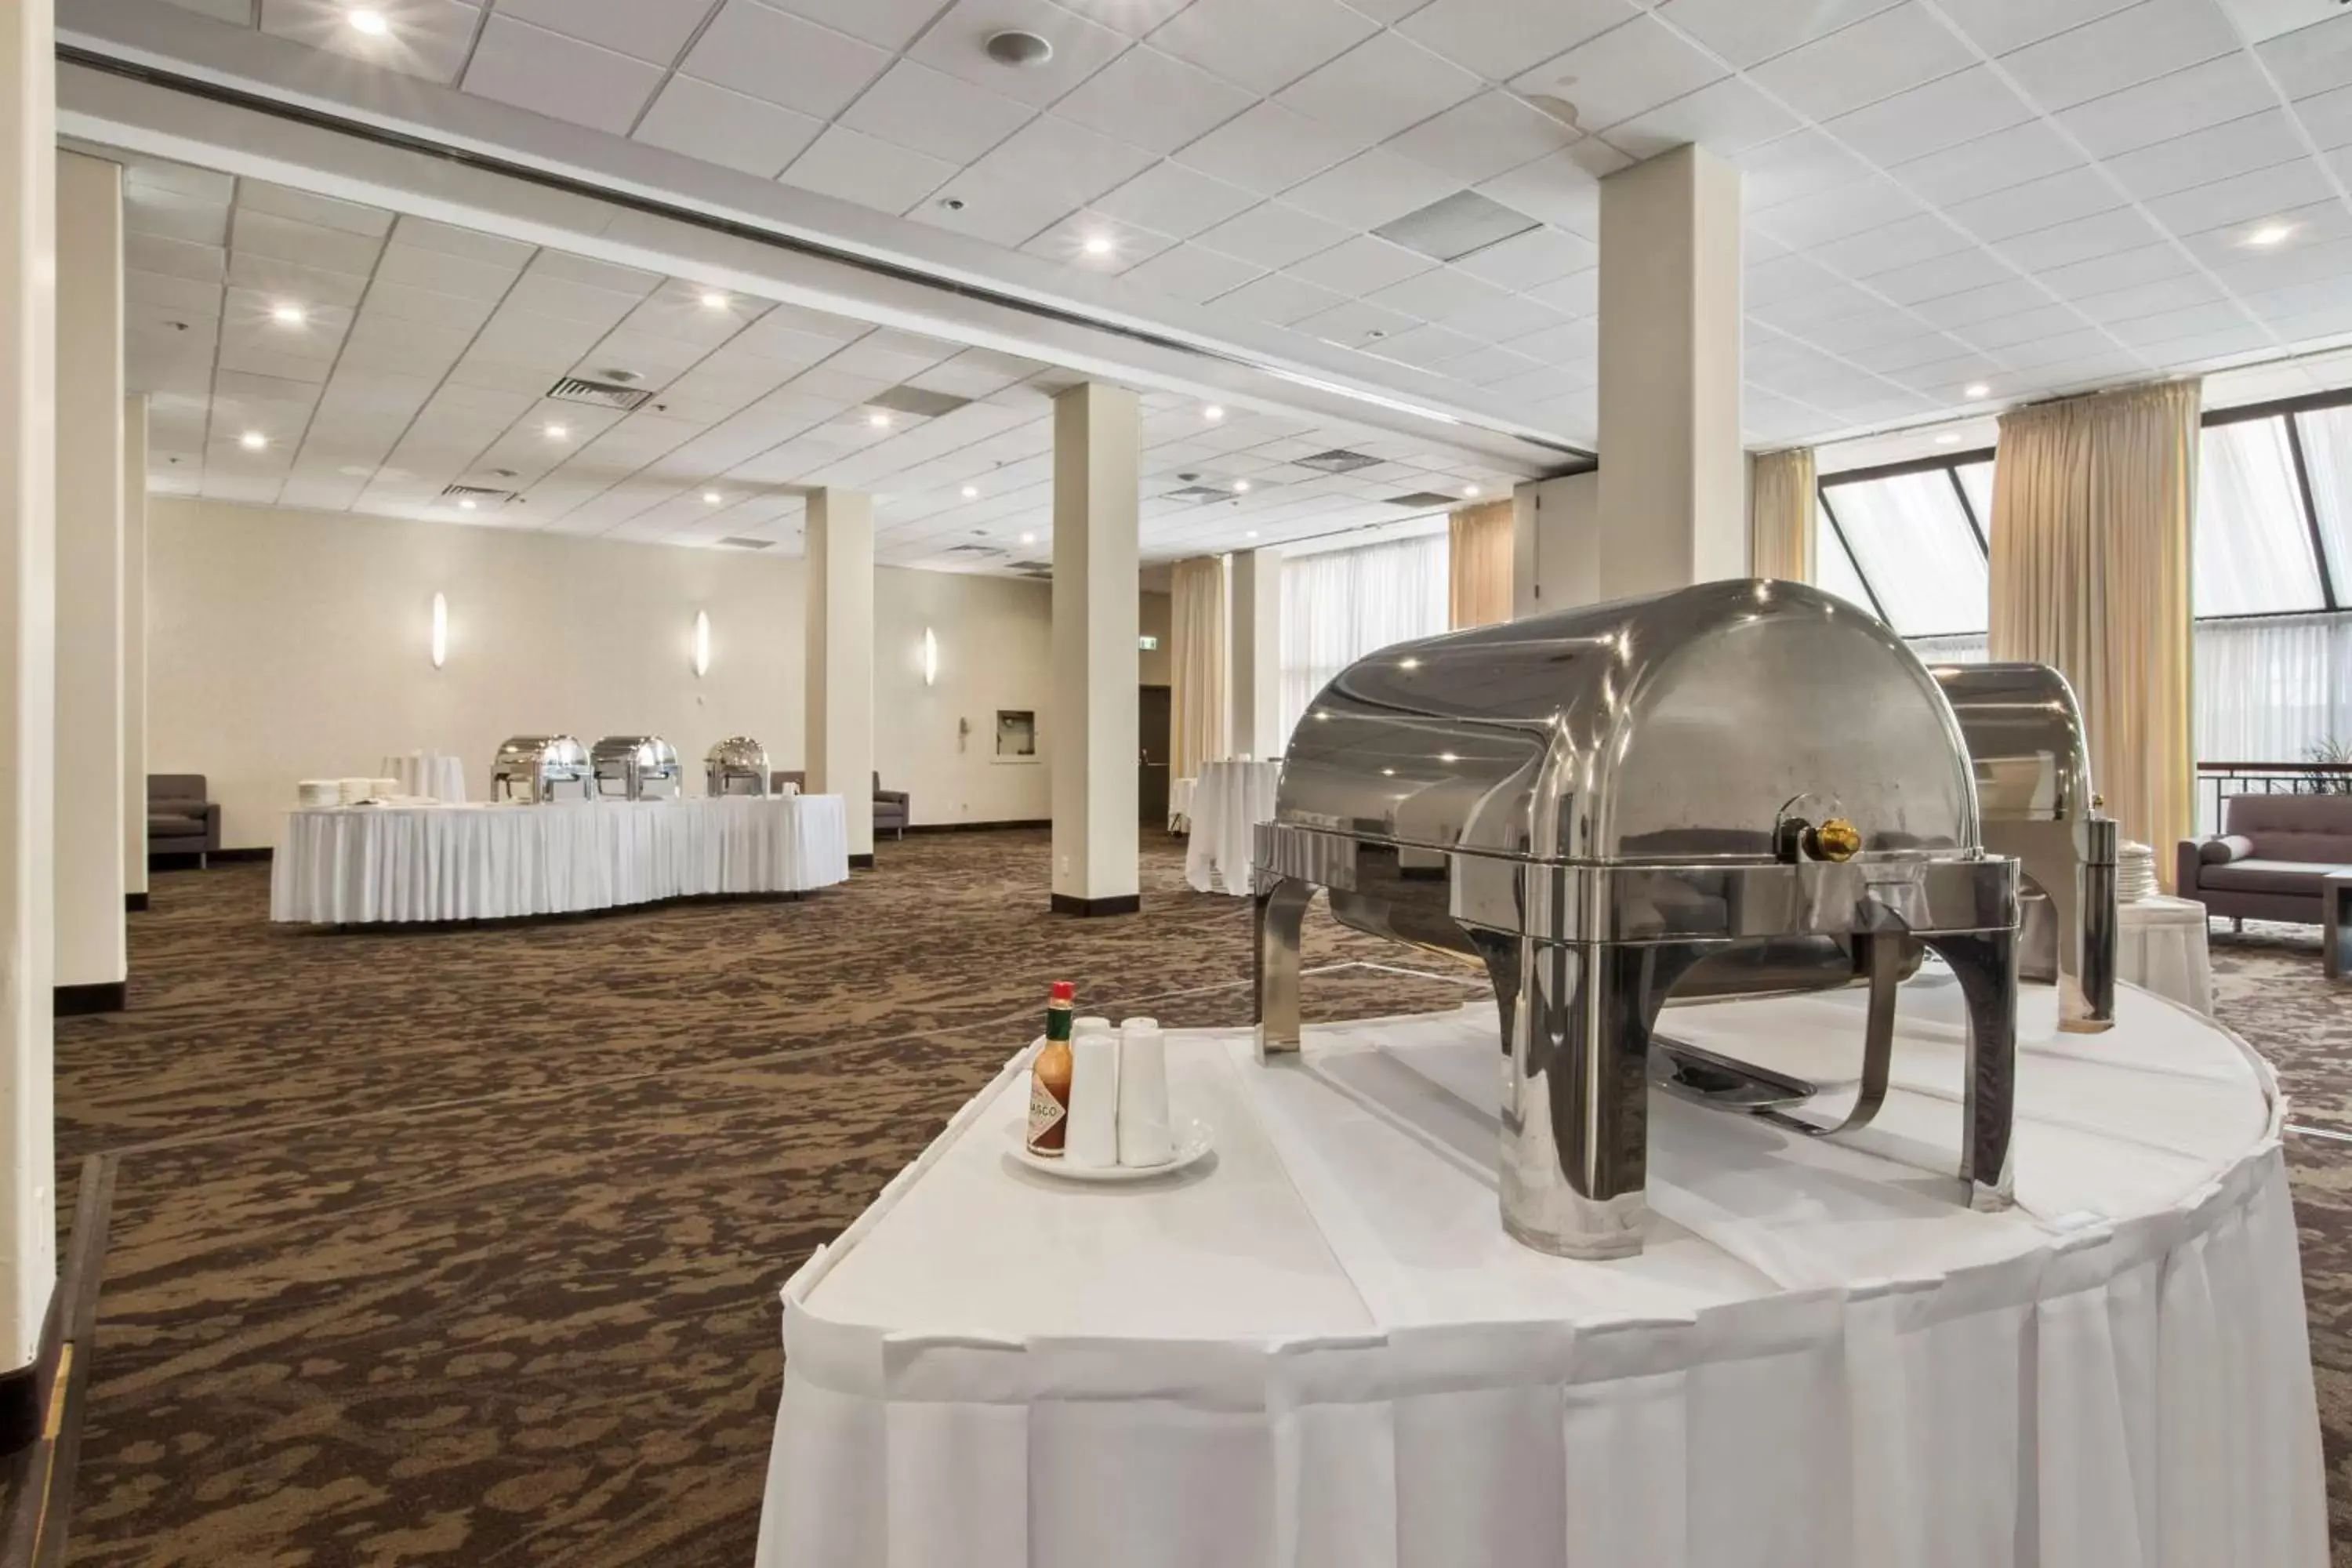 On site, Banquet Facilities in Best Western Premier Calgary Plaza Hotel & Conference Centre